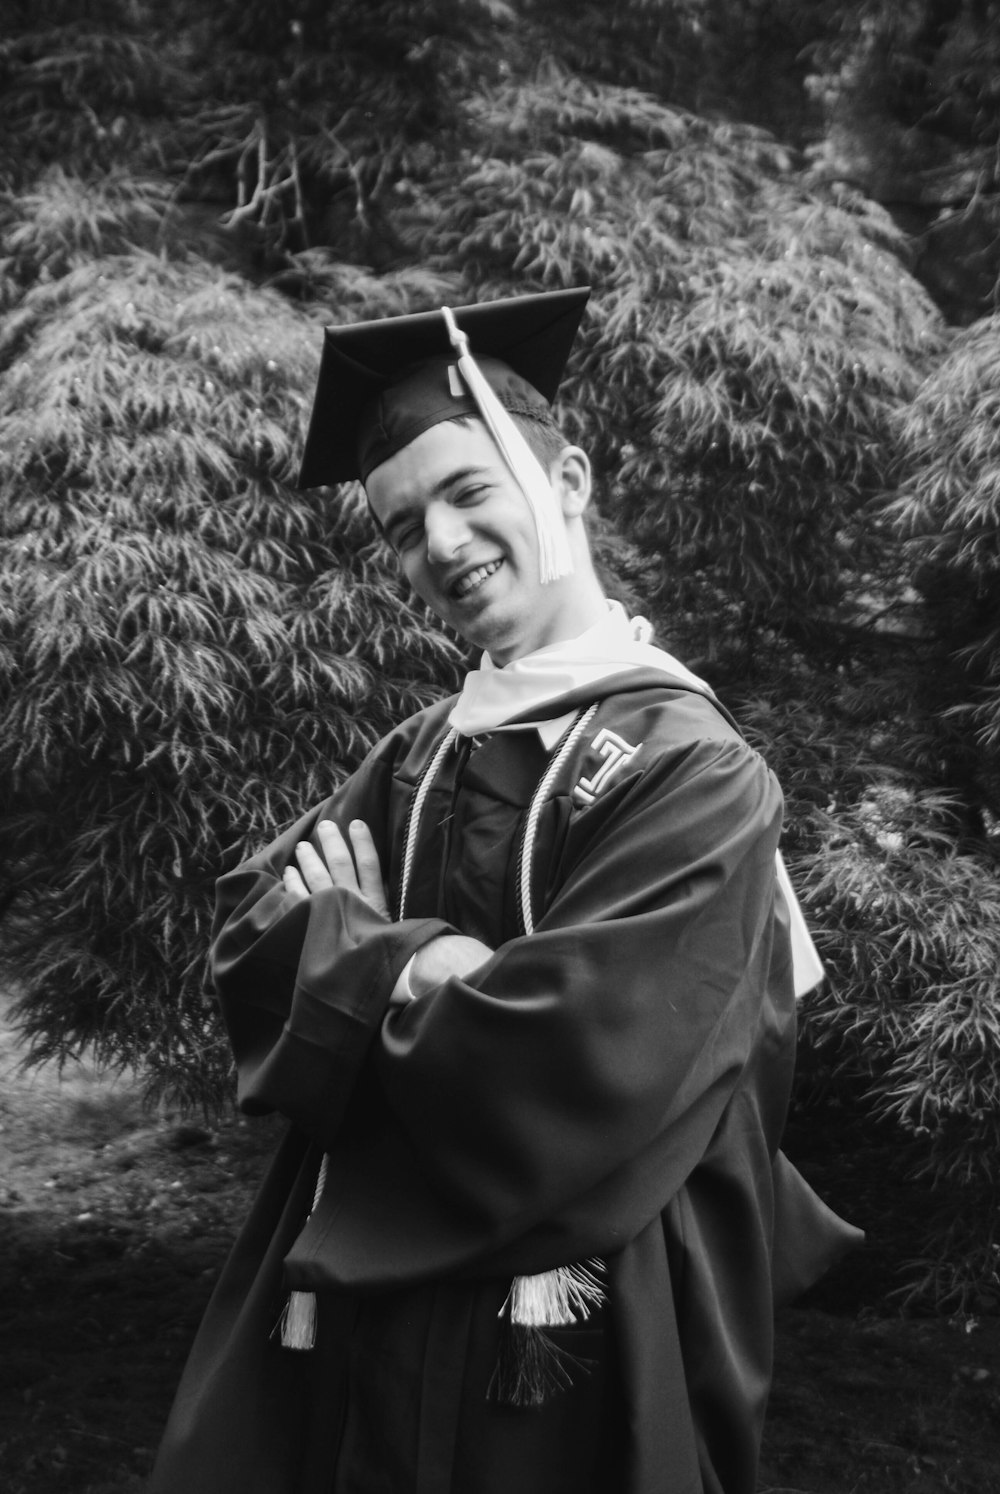 grayscale photography of man wearing academic dress